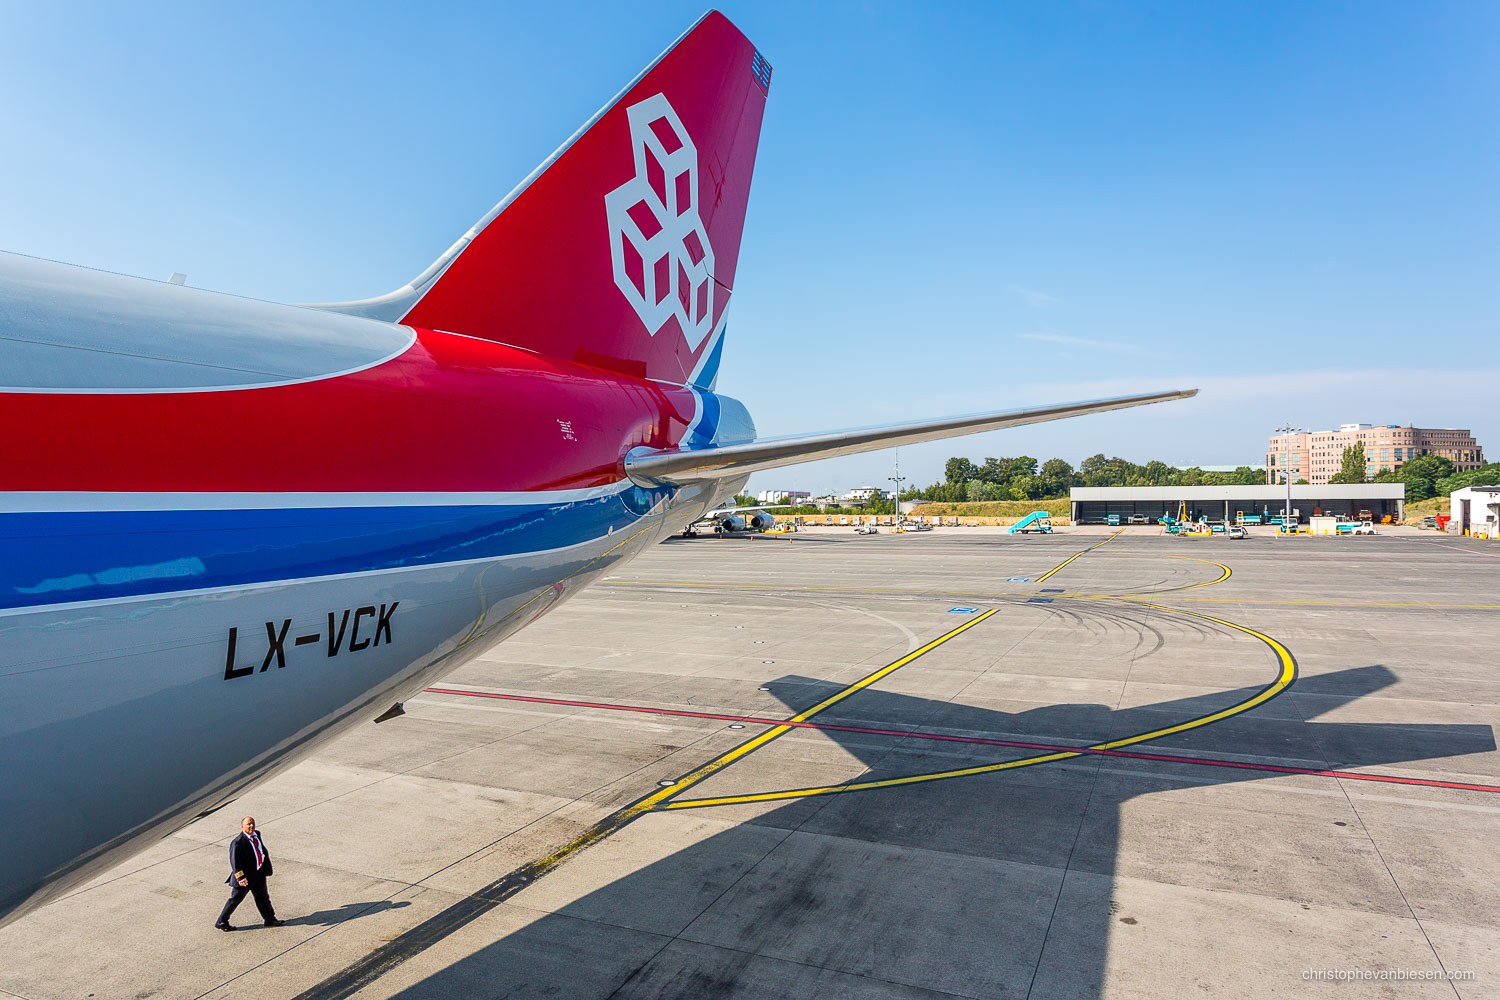 Work with me - Commission Work - Boeing 747 of Luxembourg's Cargolux fleet - Pilot - Photography by Christophe Van Biesen - Luxembourg Landscape and Travel Photographer